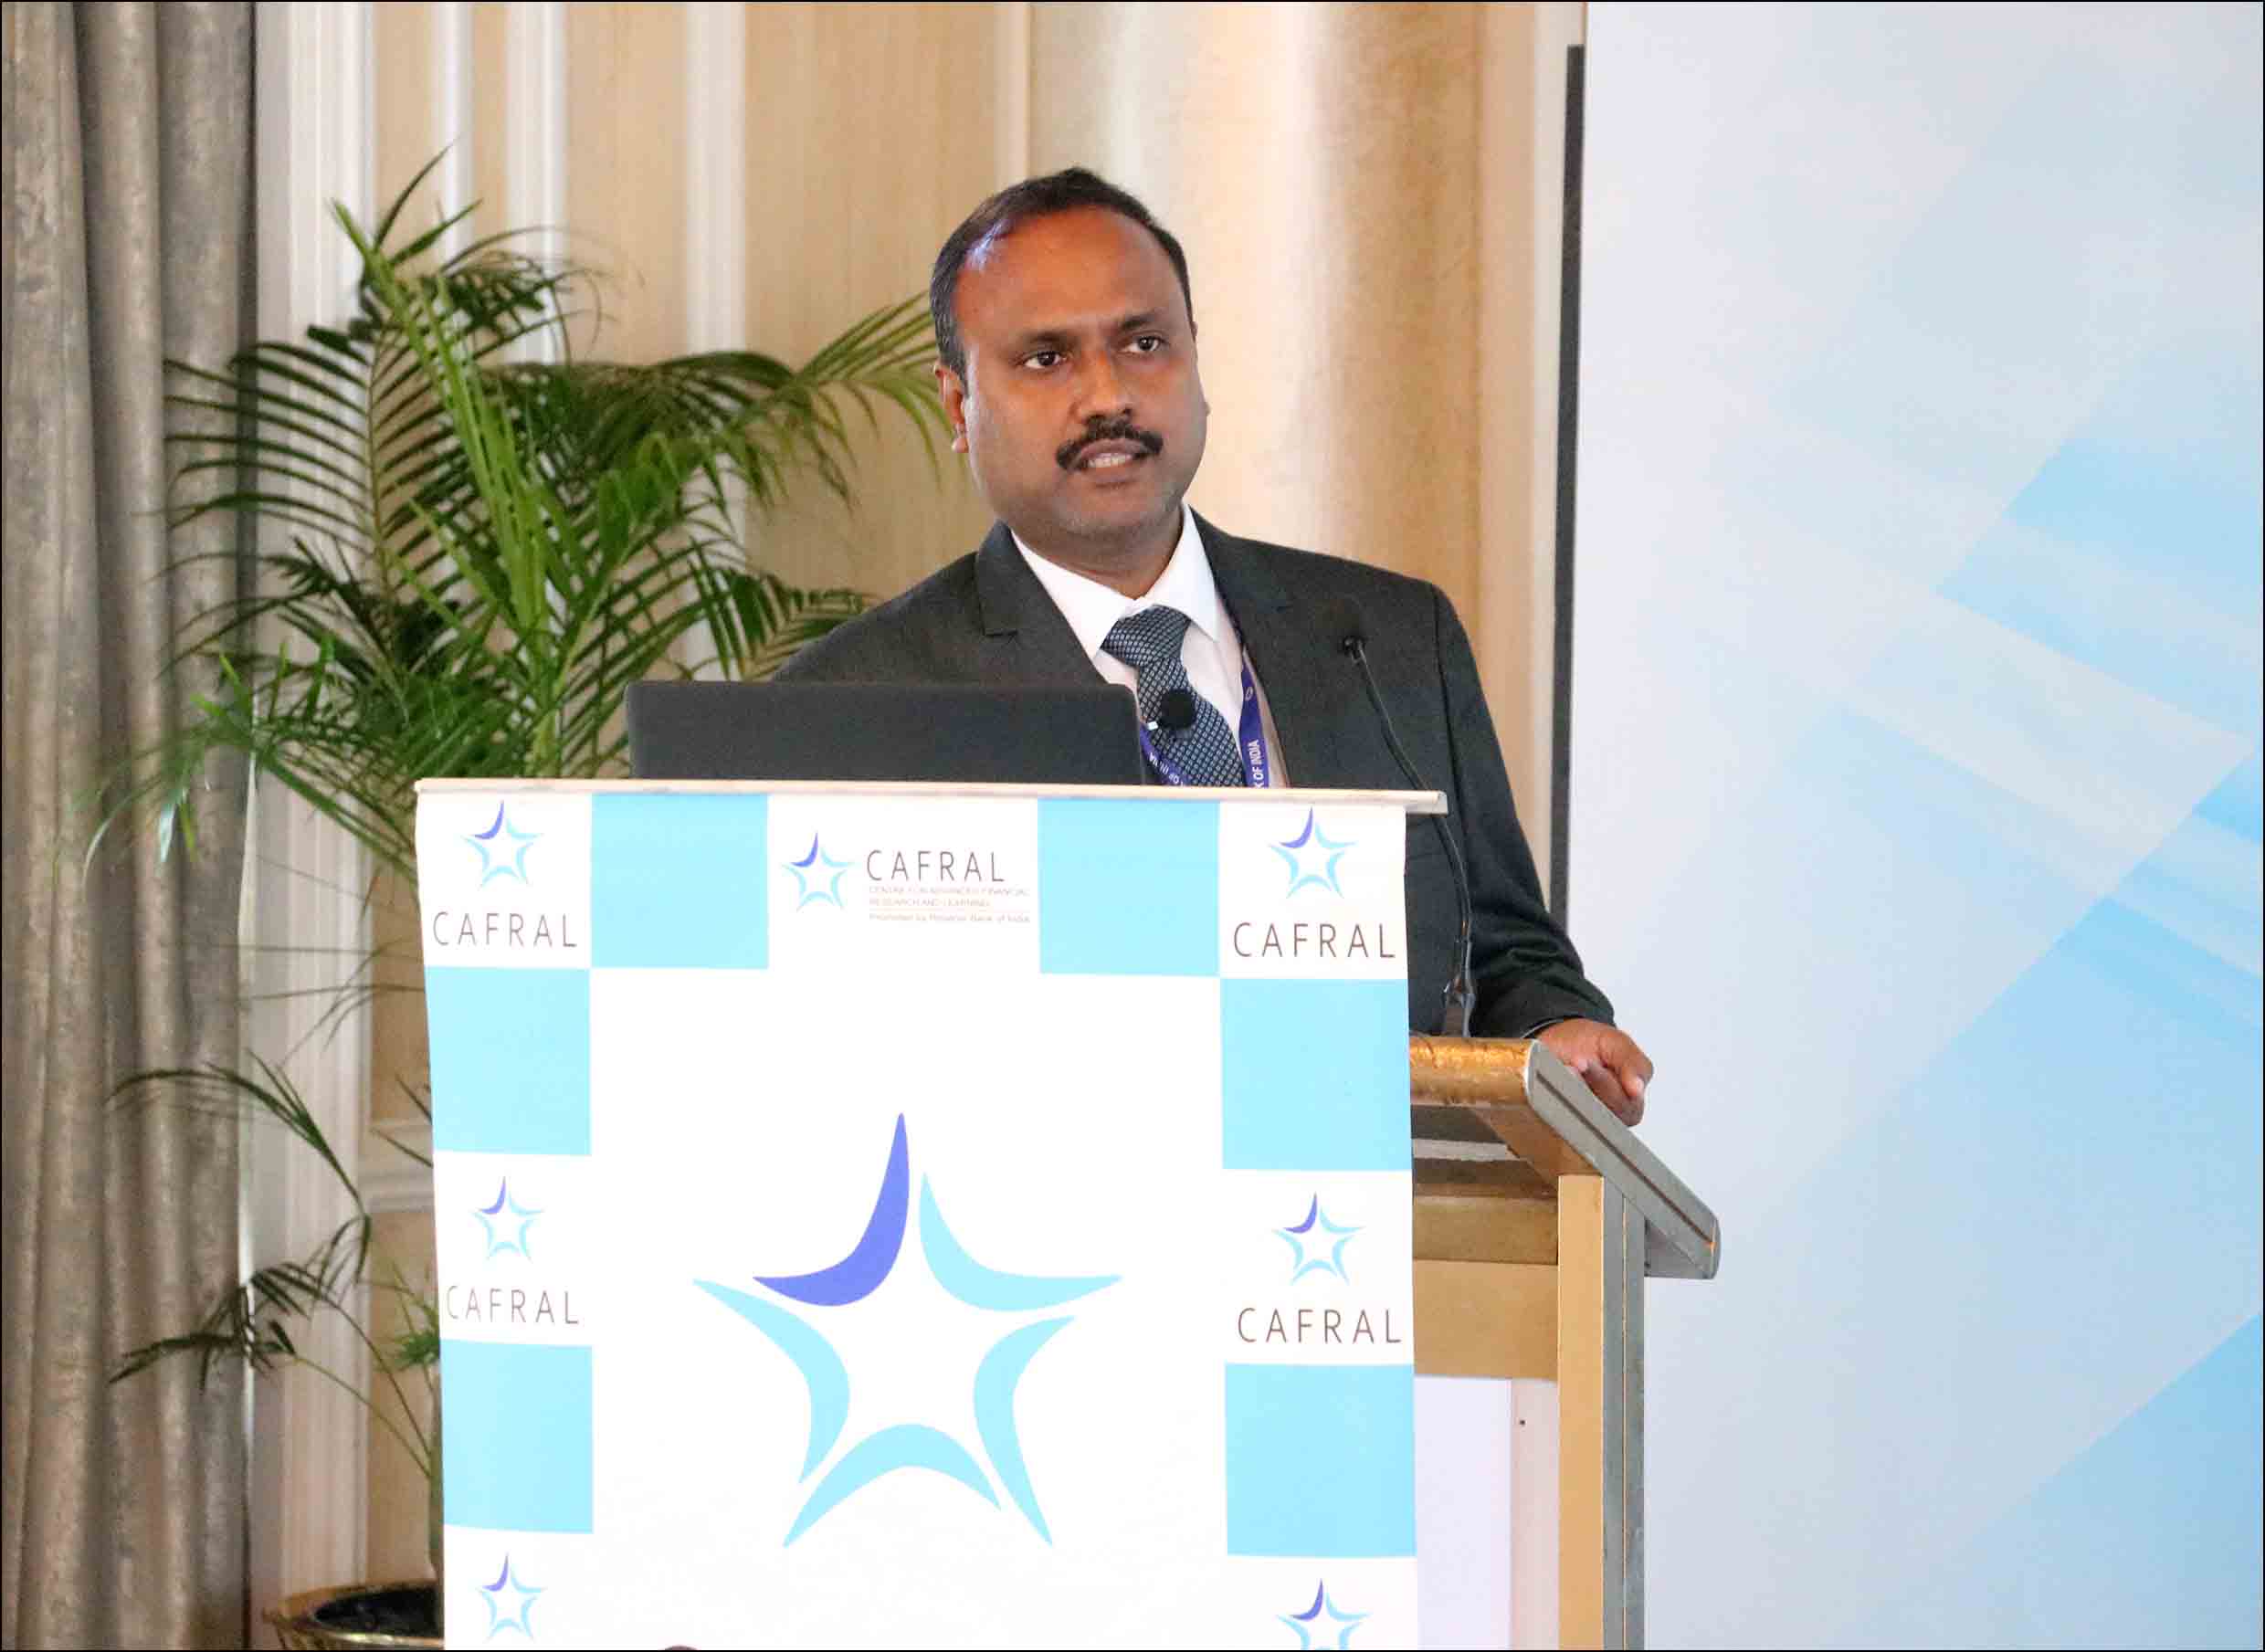 Muralidharan R, Deputy General Manager, Department of Supervision, Reserve Bank of India